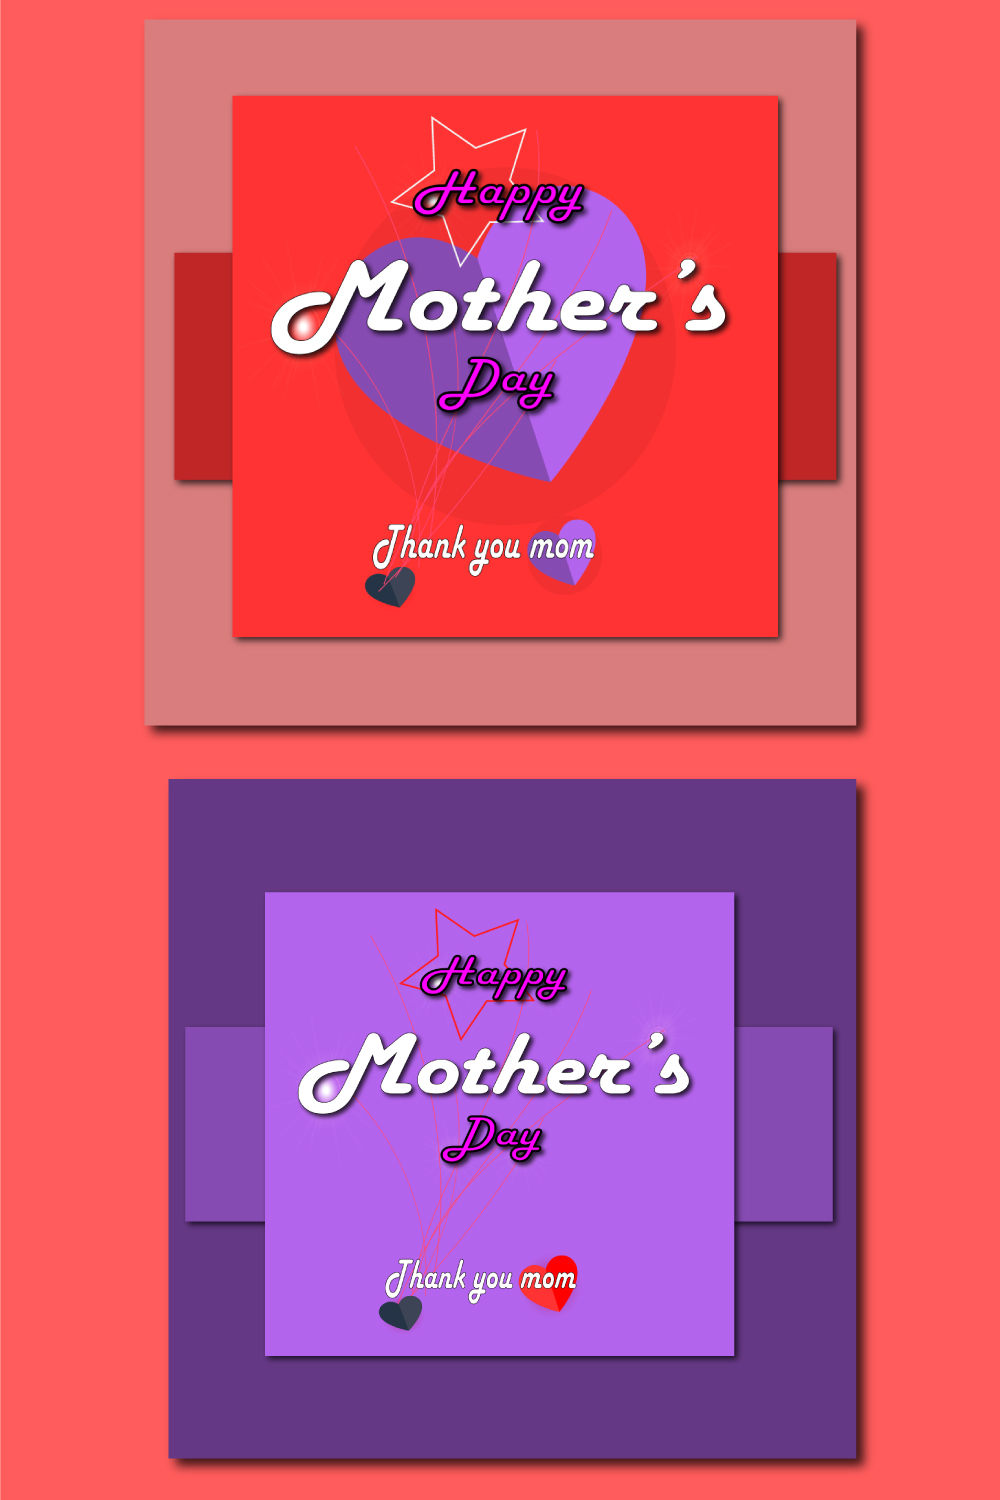 Happy Mother's day pinterest preview image.